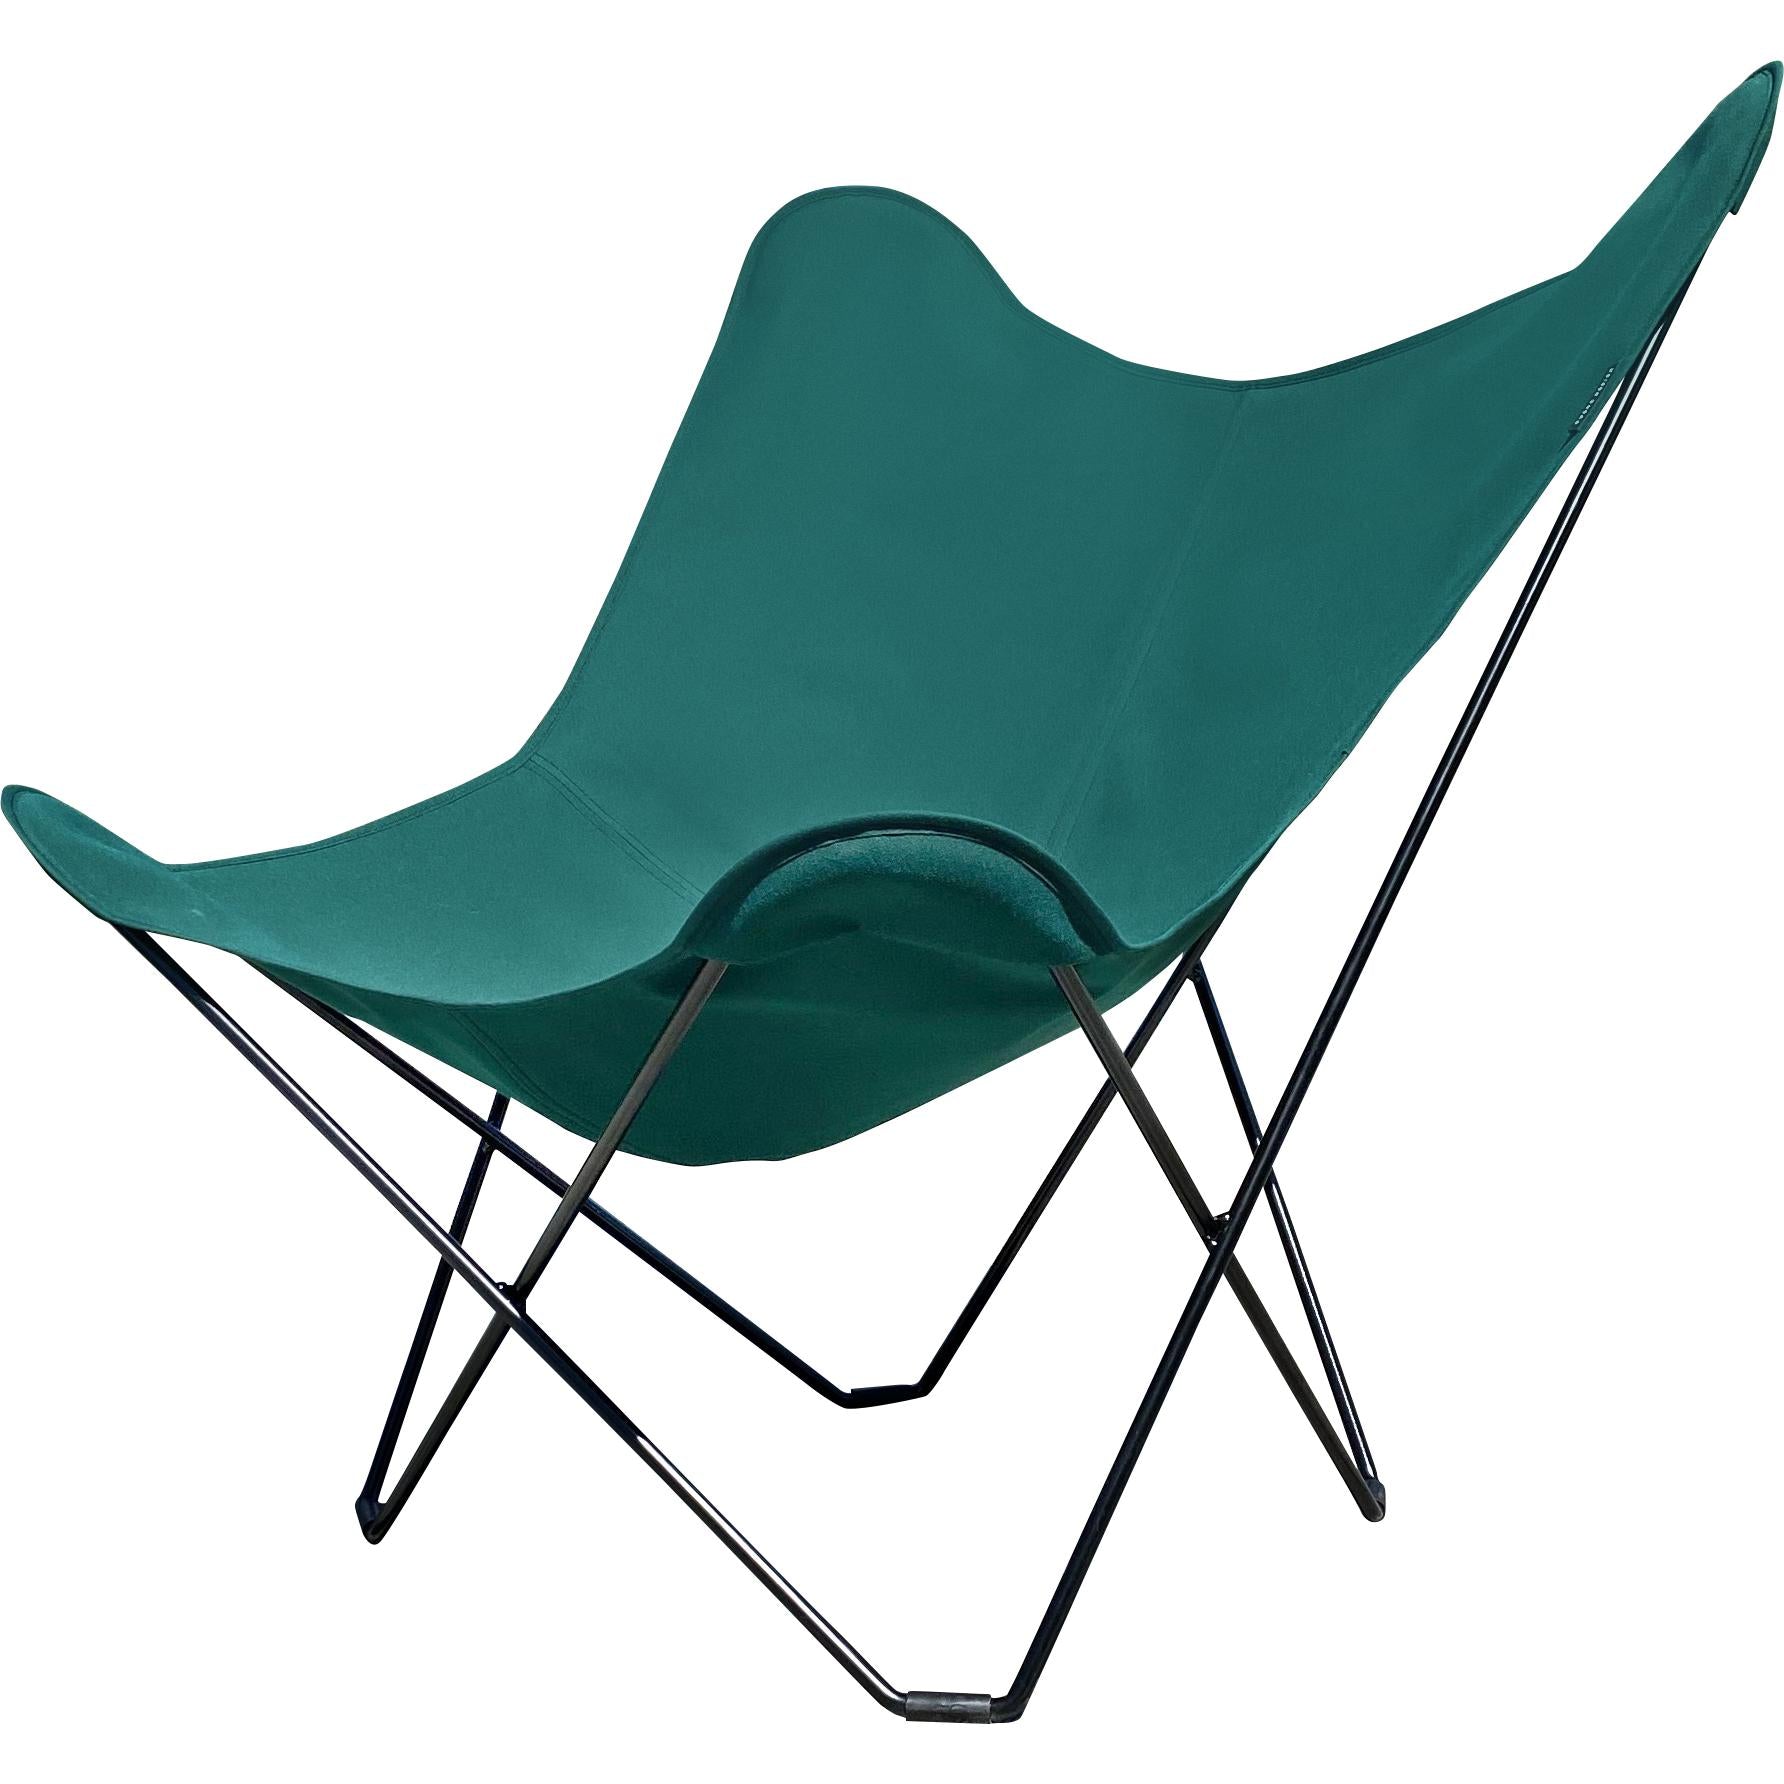 Cuero Sunshine Mariposa Butterfly Chair, Forest Green/Black Outdoor Frame